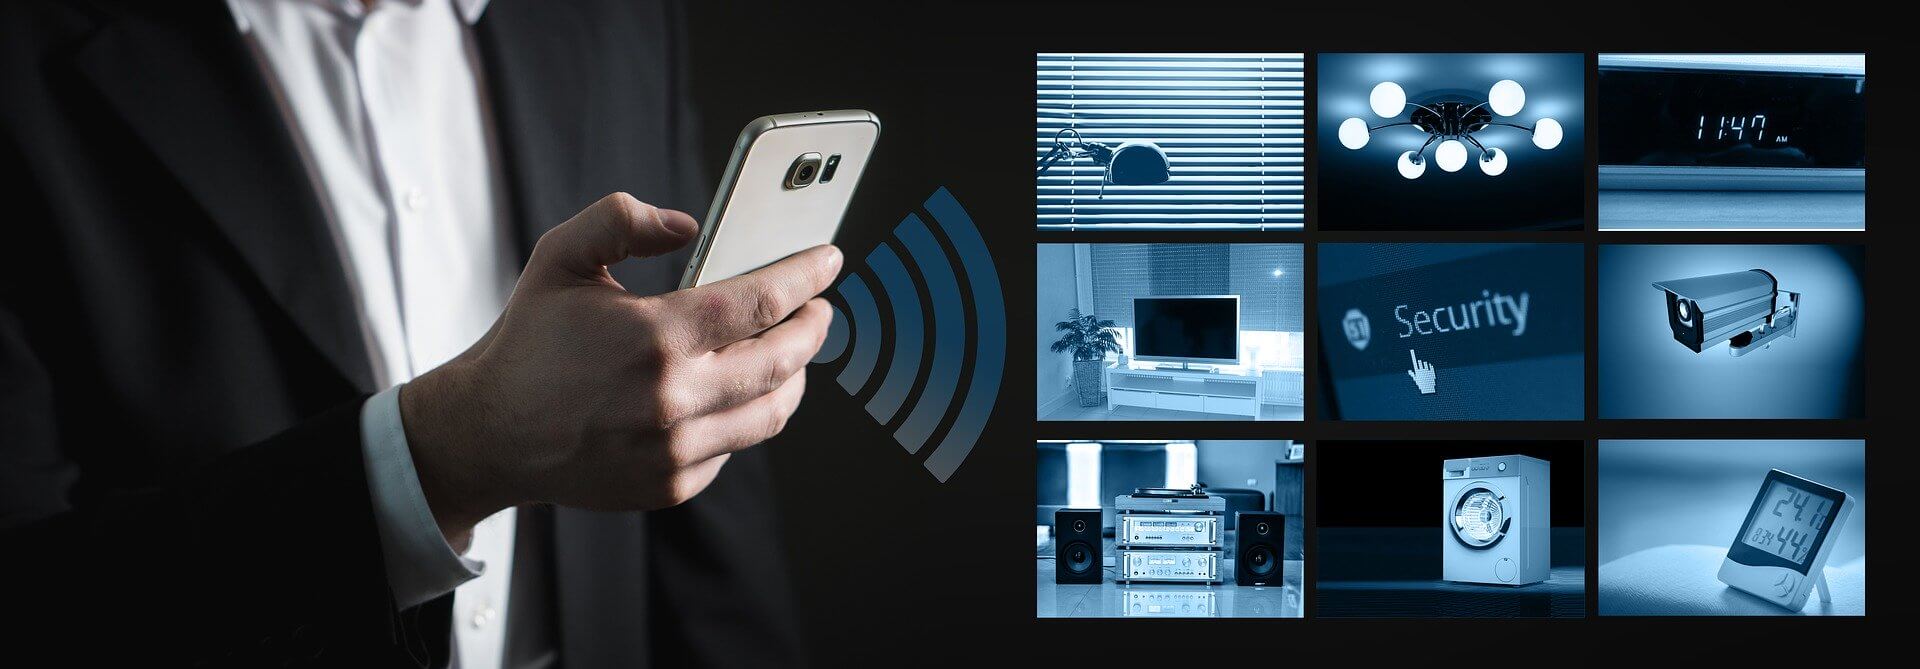  A person is using a smartphone to control smart home devices such as lights, thermostats, and security cameras.